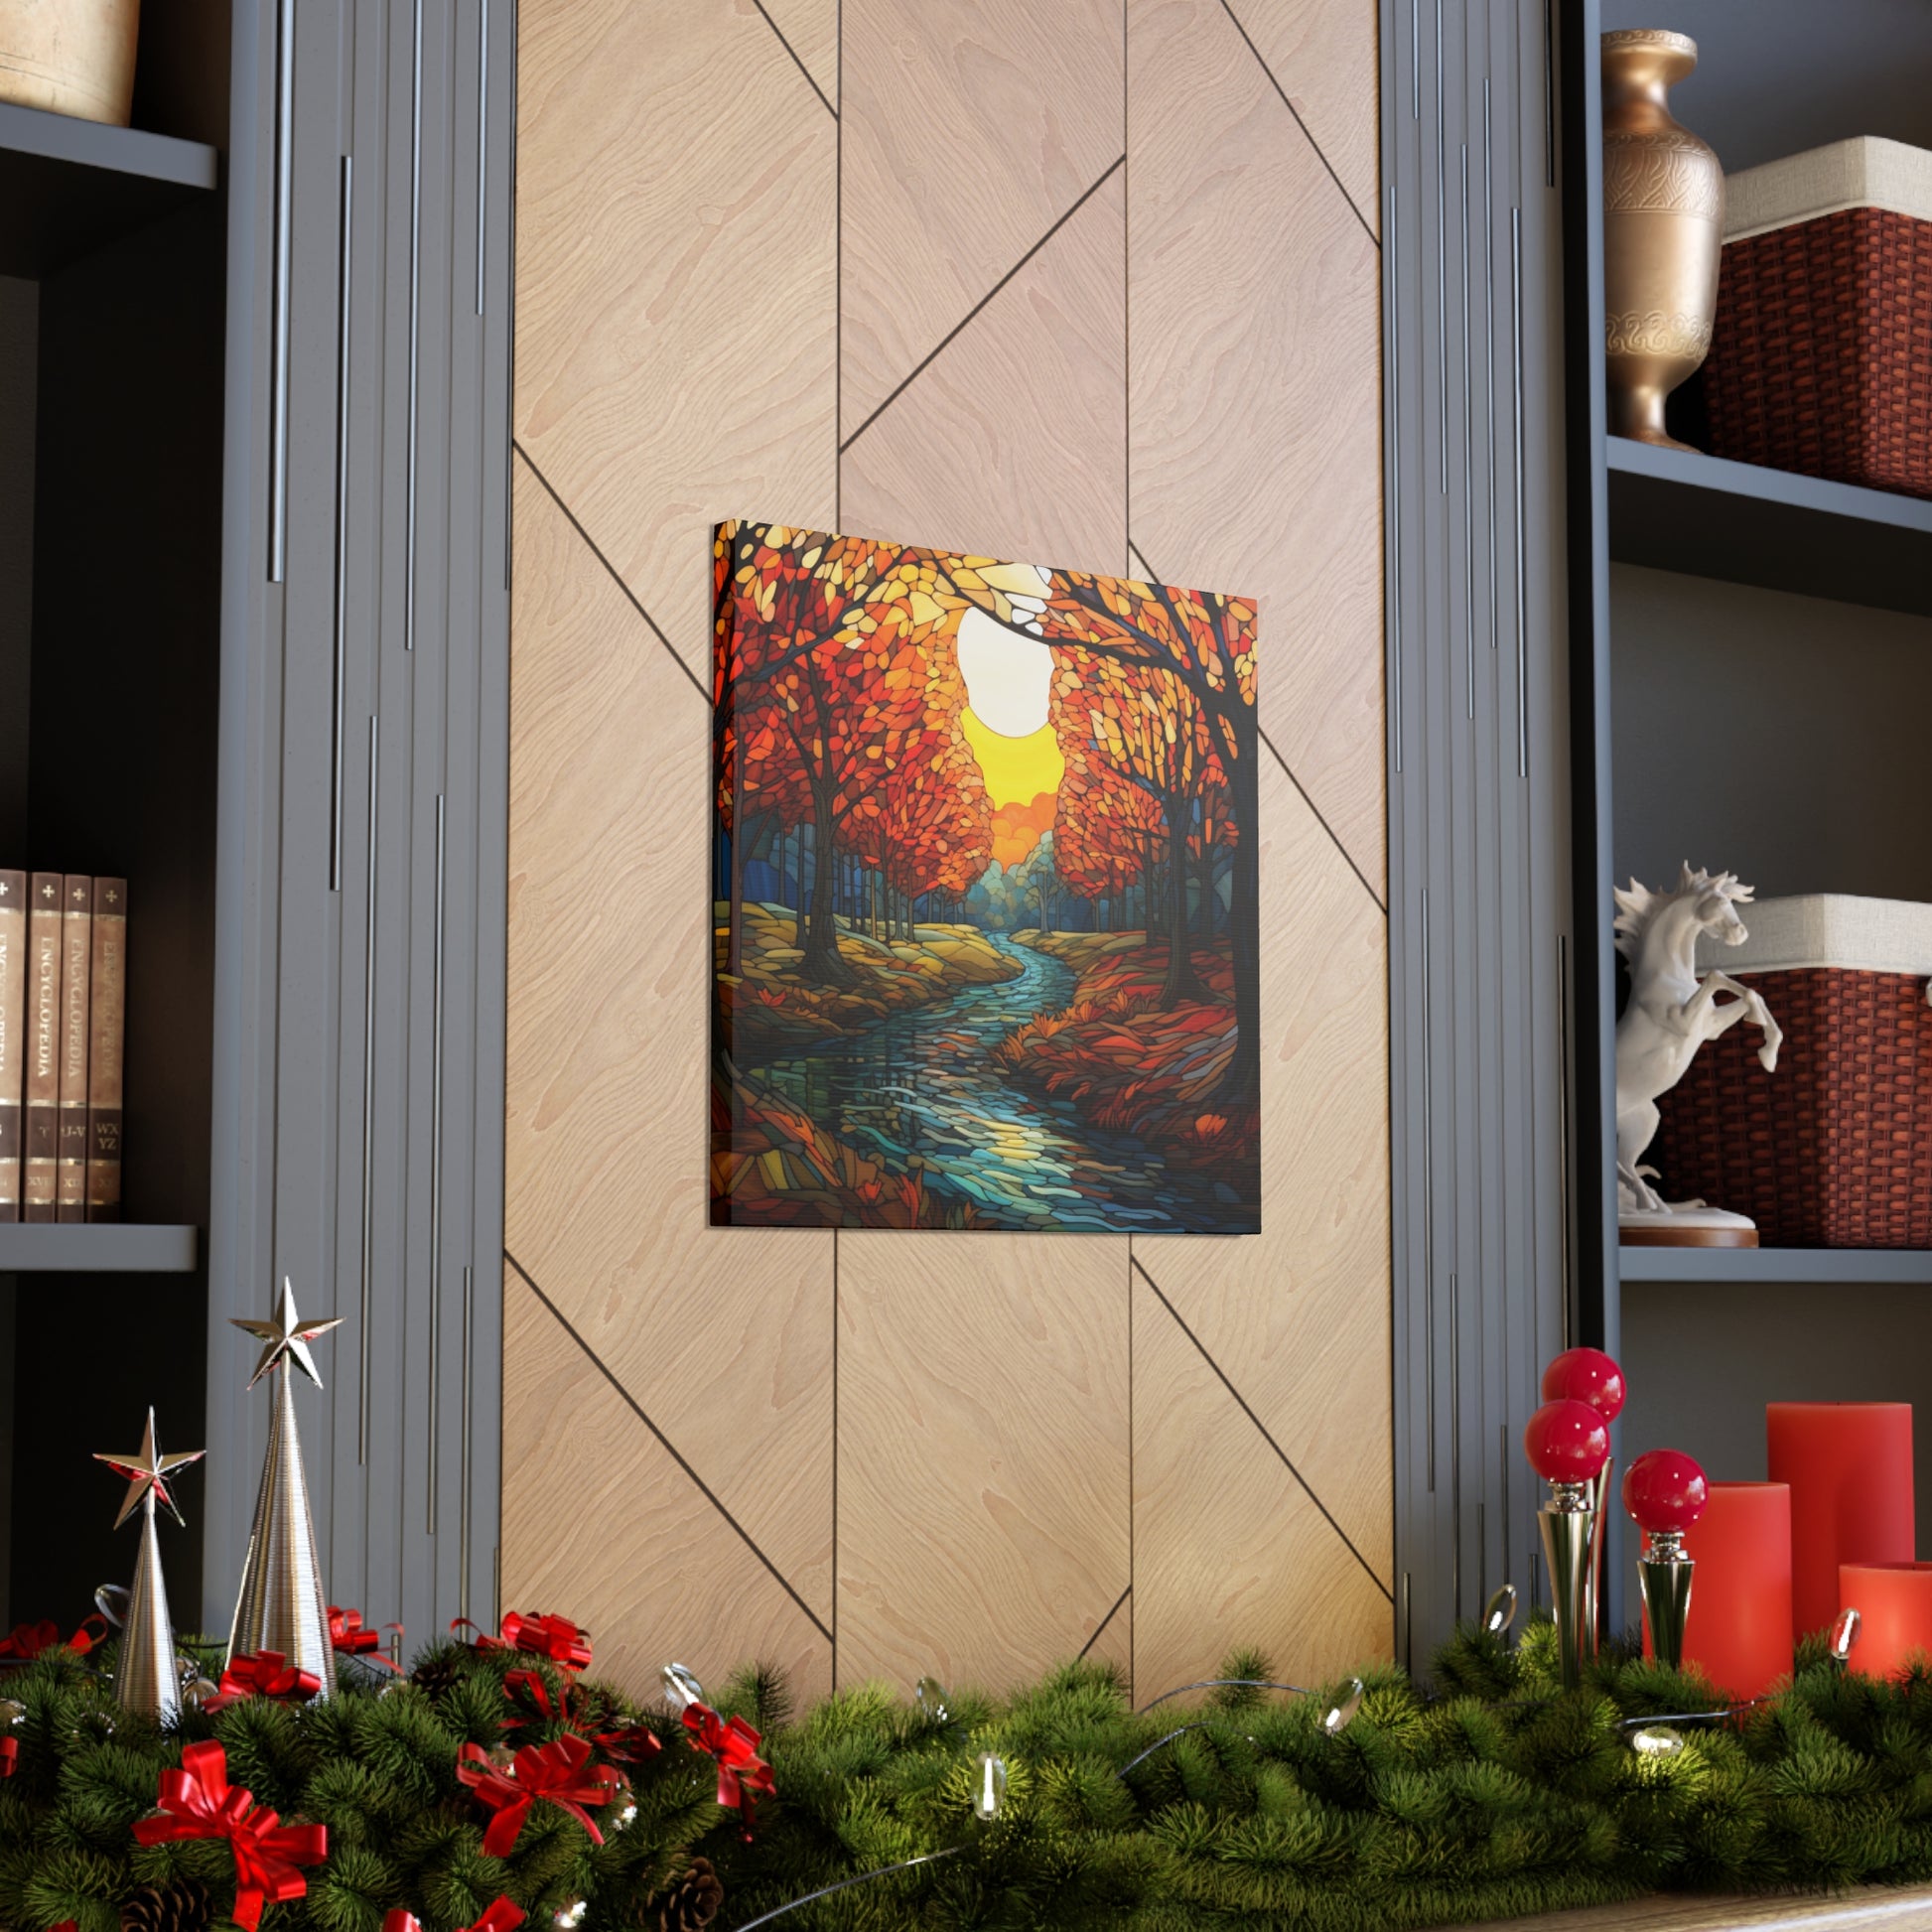 "River Sunset" Wall Art - Weave Got Gifts - Unique Gifts You Won’t Find Anywhere Else!